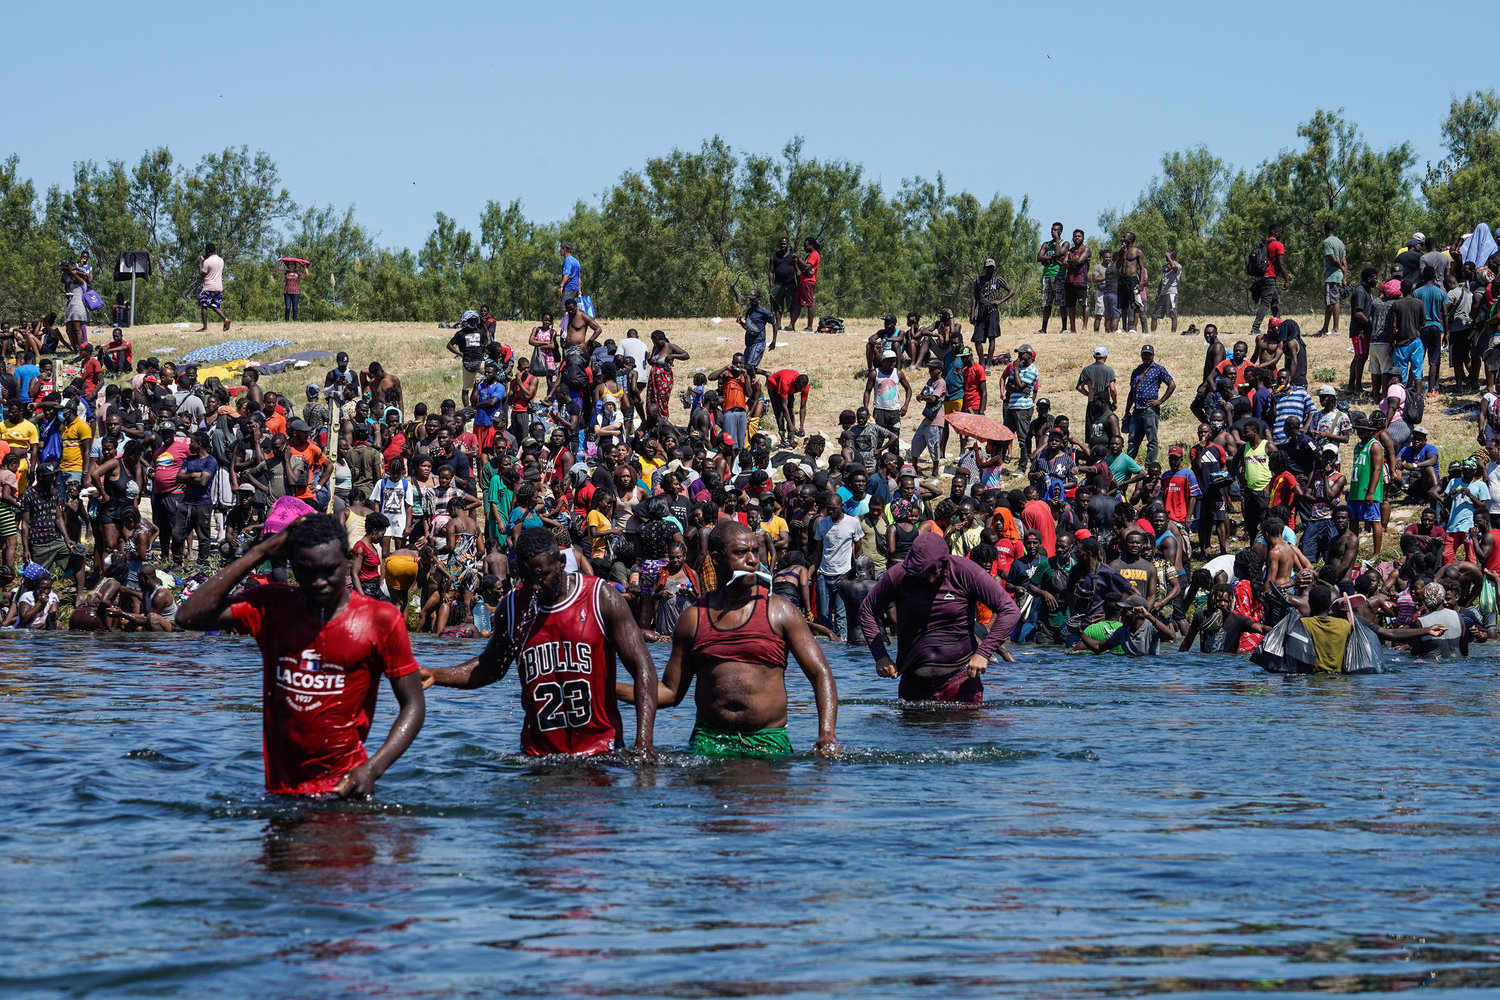 Haitian migrants cross the Rio Grande river to get food and water in Mexico, after another crossing point was closed near the Acuna Del Rio International Bridge in Del Rio, Texas on Sept. 19, 2021. (Paul Ratje/AFP/Getty Images/TNS)